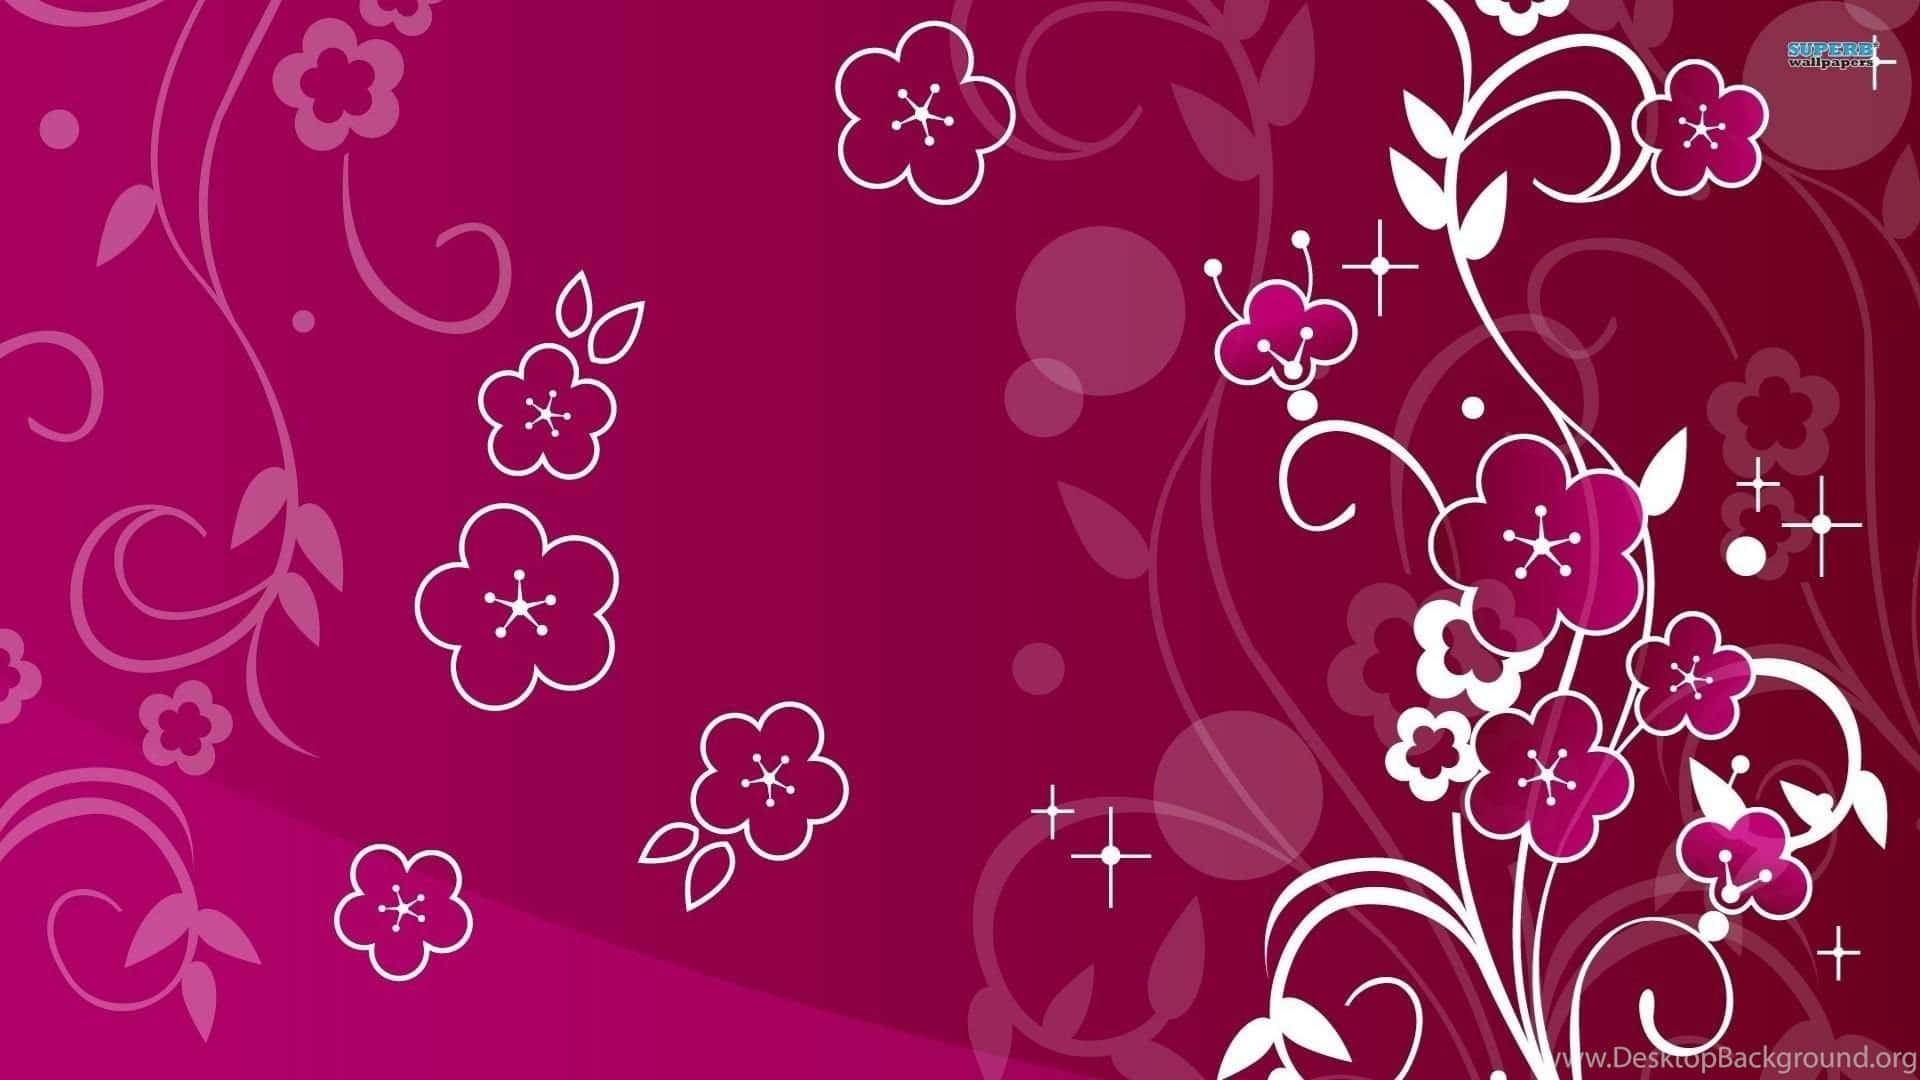 Magenta floral inspired wallpaper background with seamless repeat design   Stock vector  Colourbox